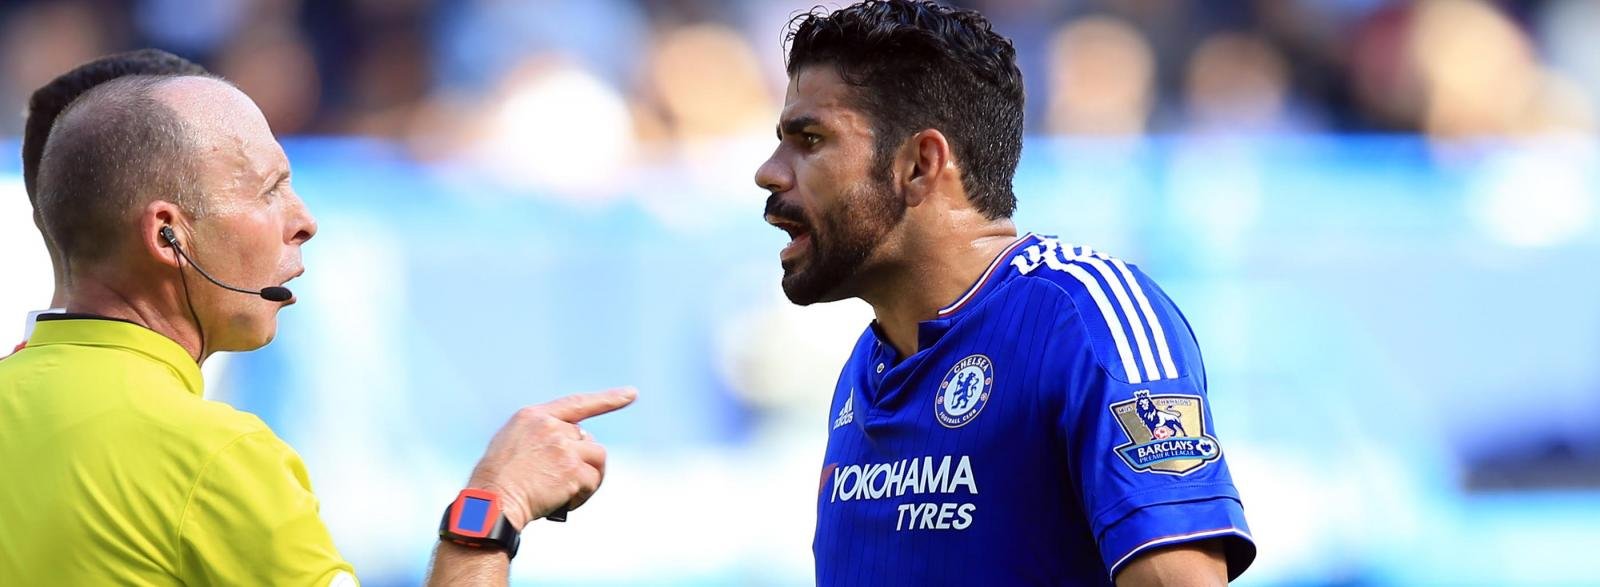 Chelsea should stick with controversial Costa